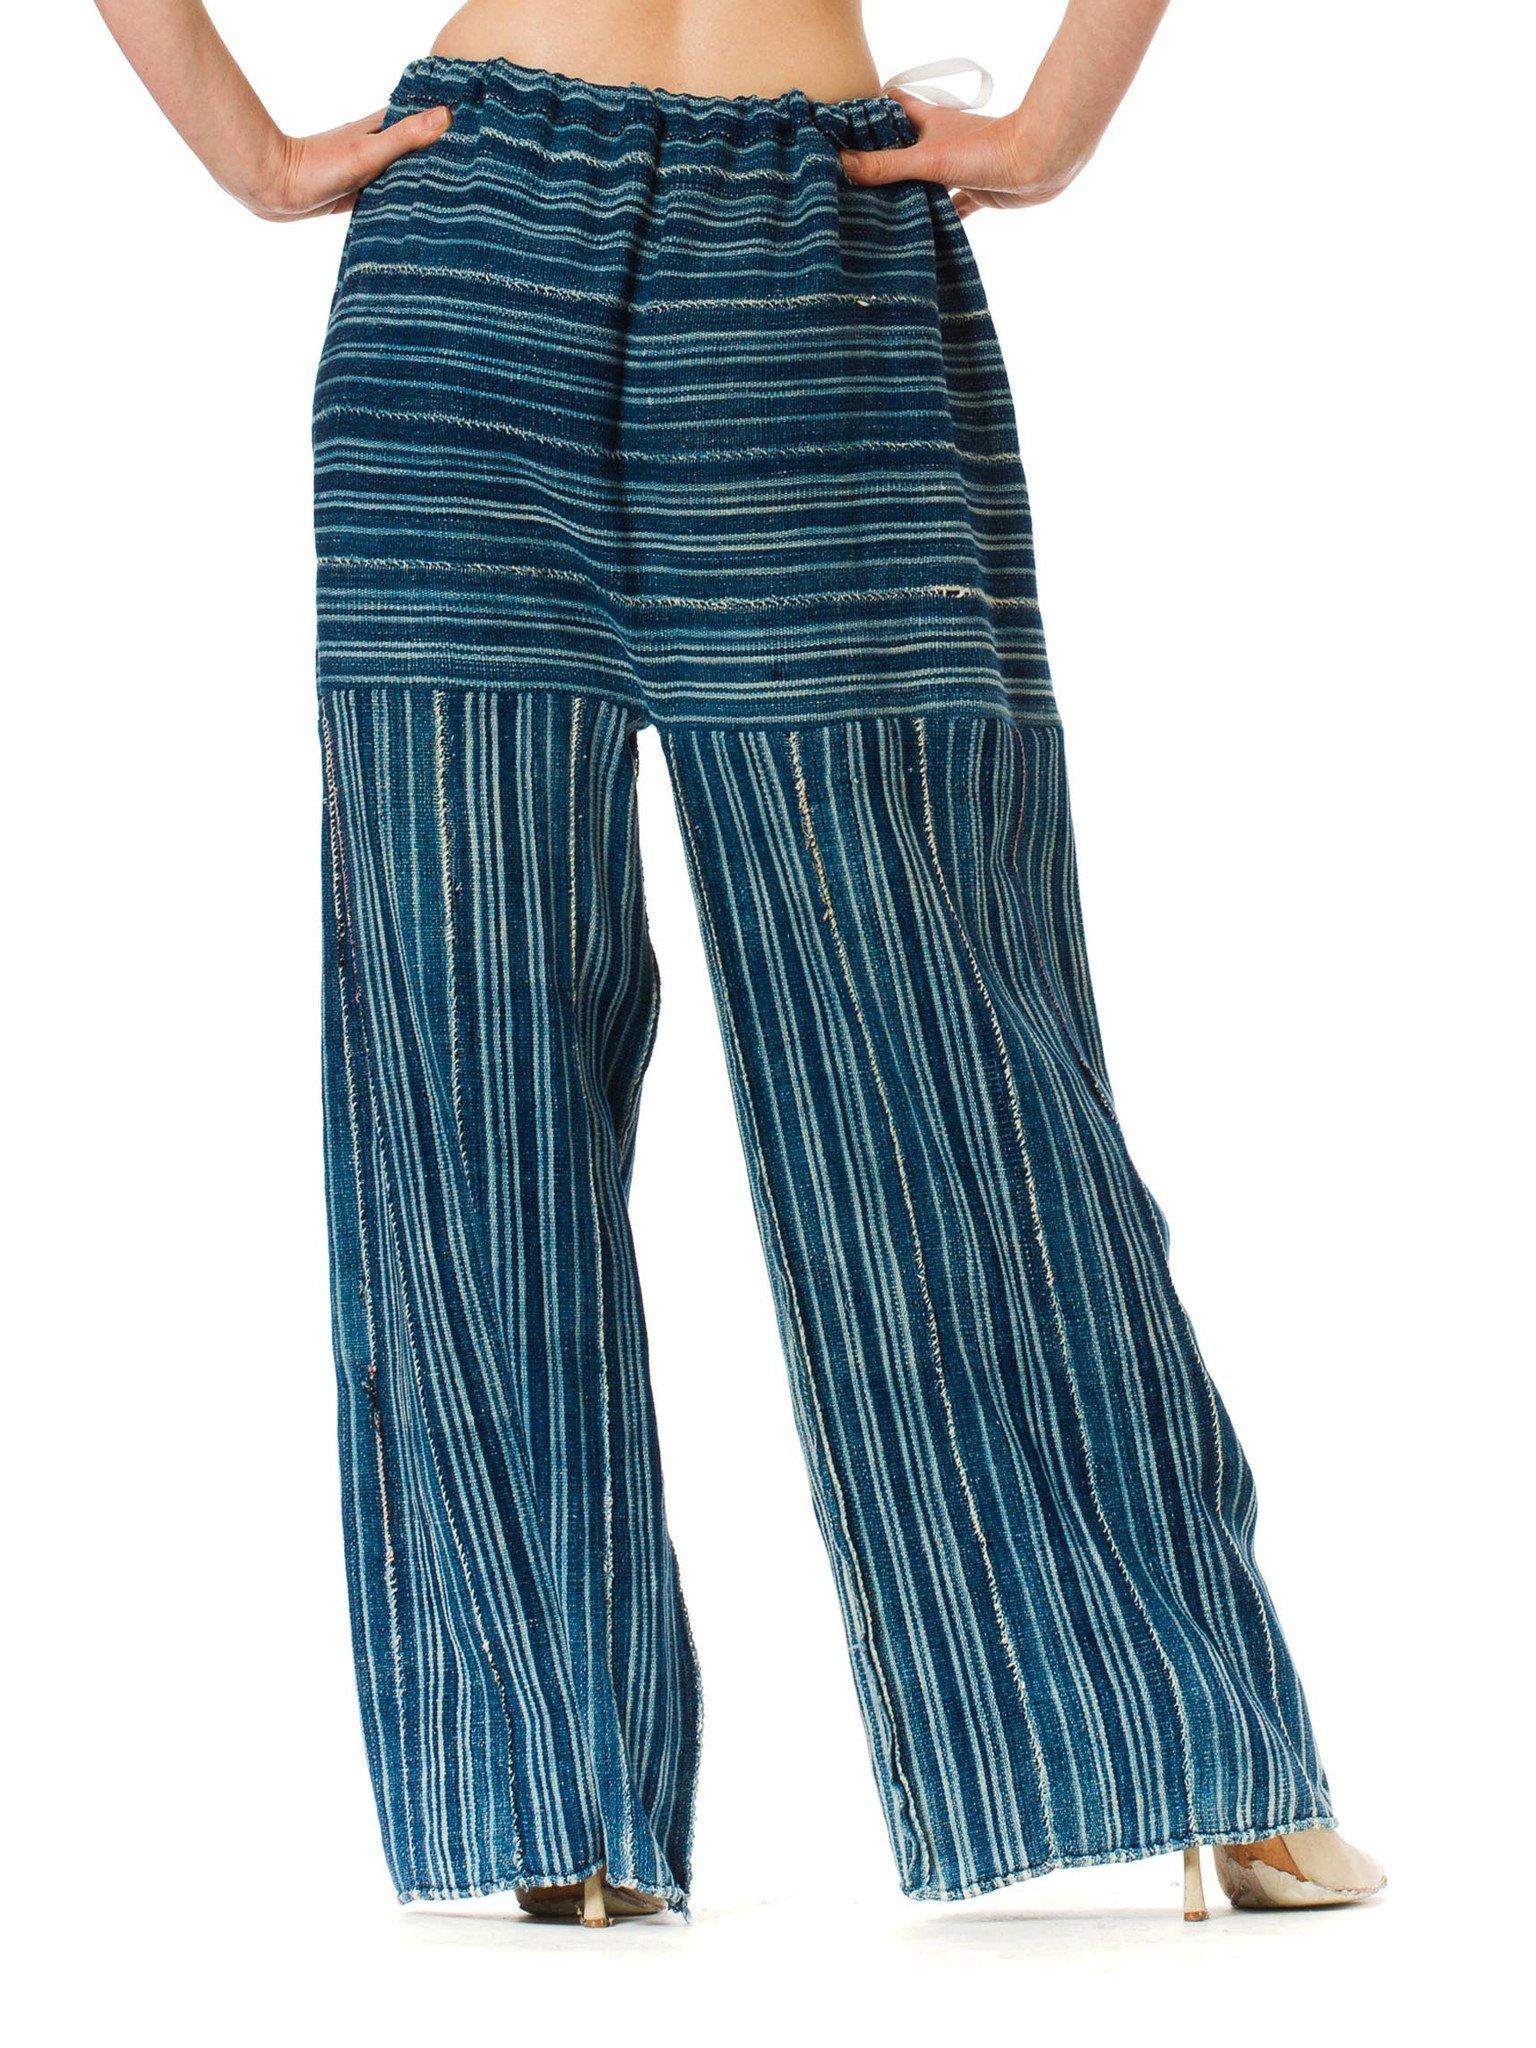 MORPHEW COLLECTION Indigo Blue Cotton Summer Palazzo Pants Made Of African Hand Woven Fabric
MORPHEW COLLECTION is made entirely by hand in our NYC Ateliér of rare antique materials sourced from around the globe. Our sustainable vintage materials